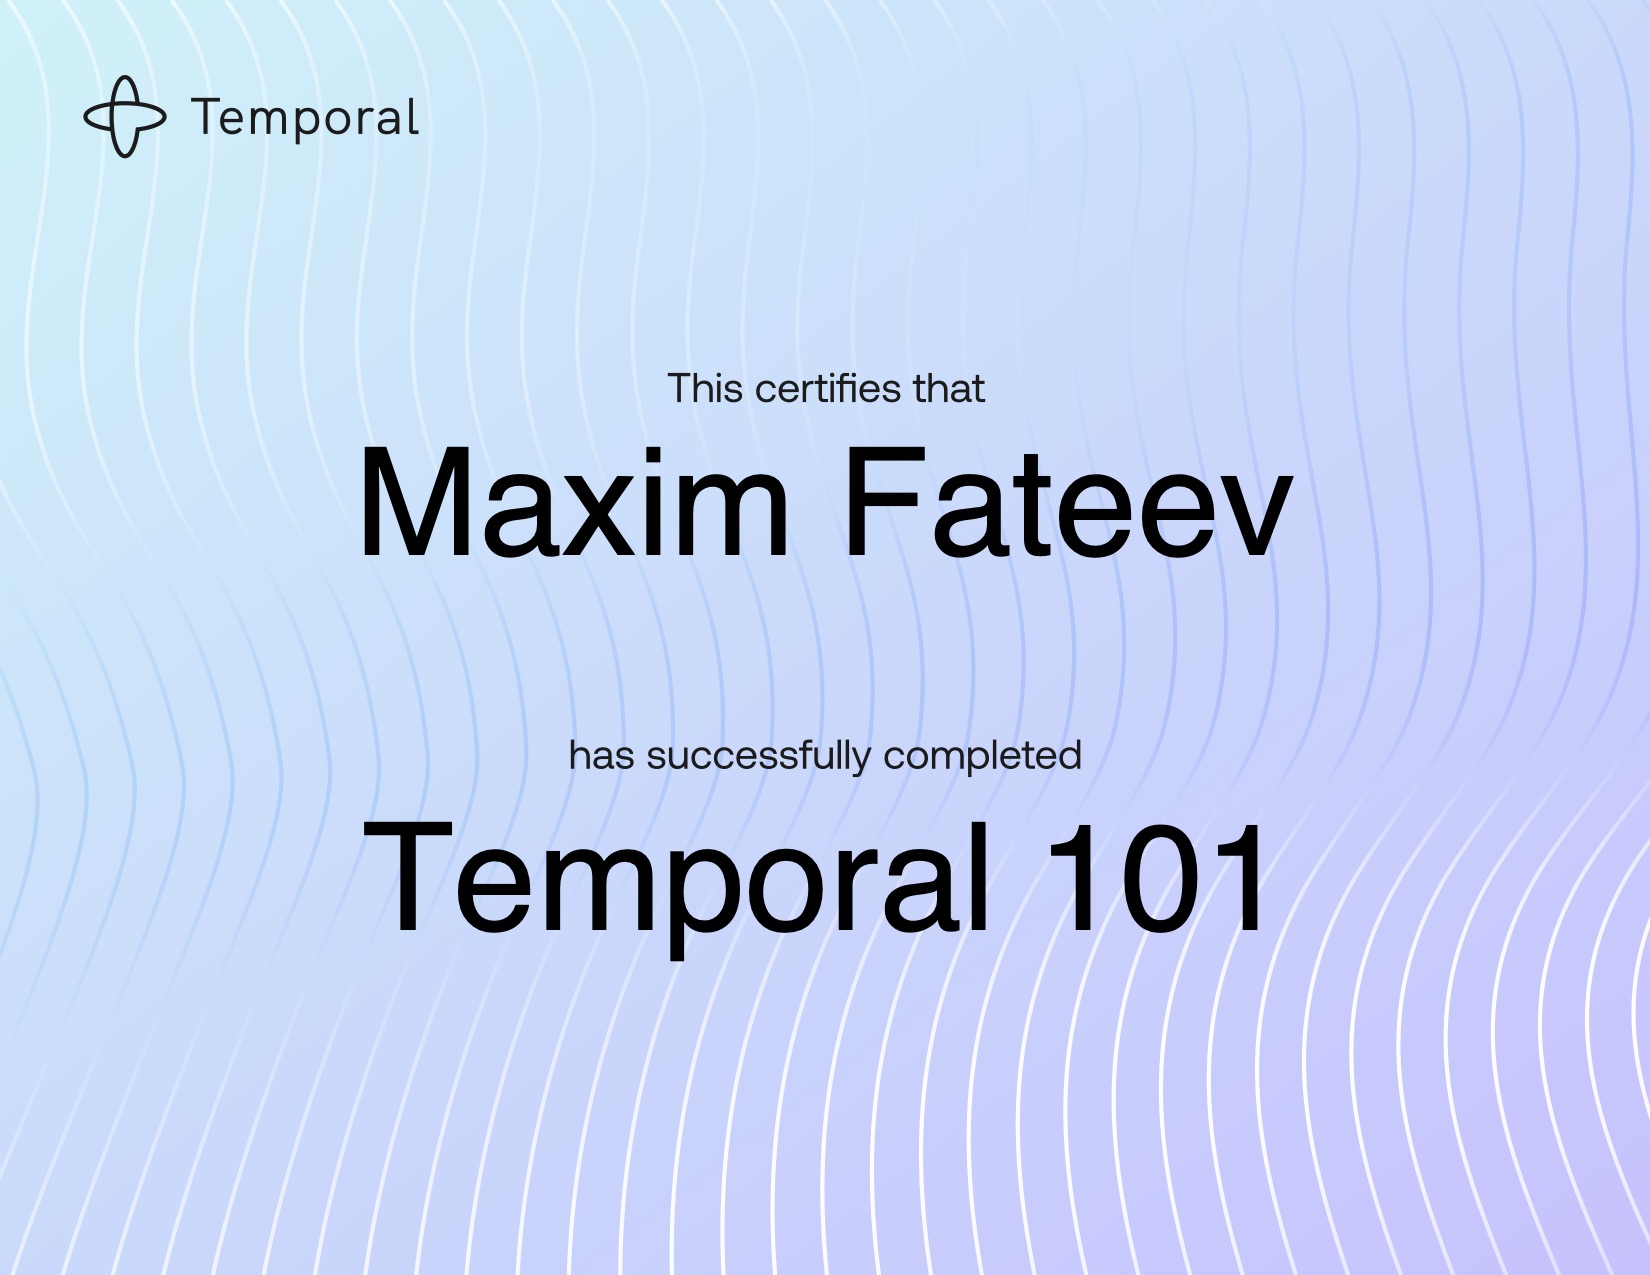 A certificate of completion stating that Maxim Fateev has successfully completed the Temporal 101 course